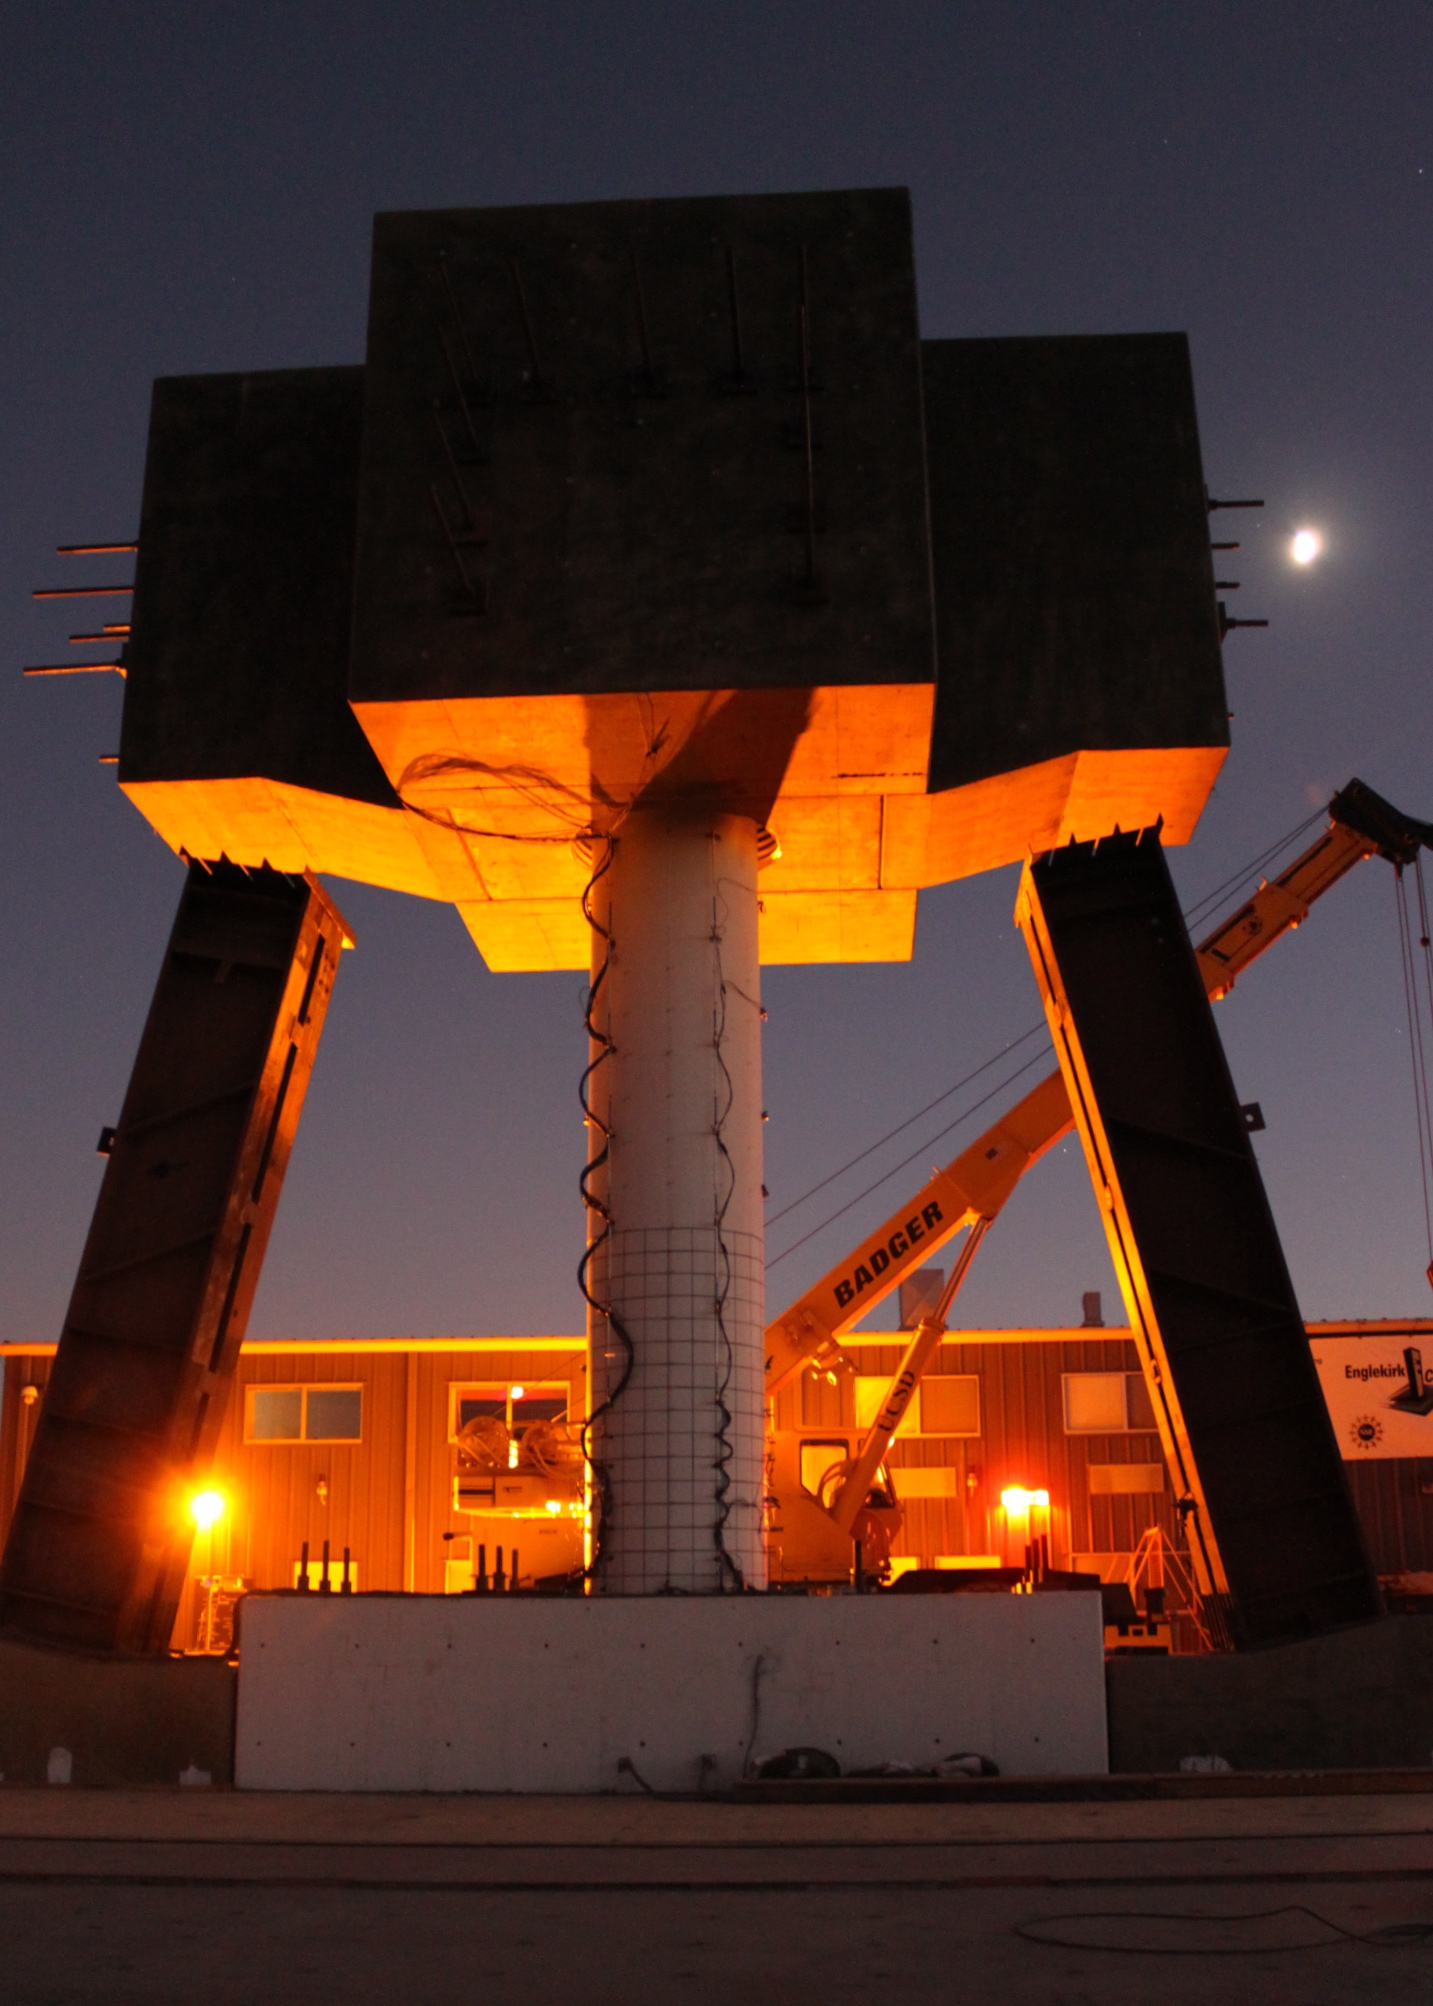 a 24 ft bridge column is tested at night